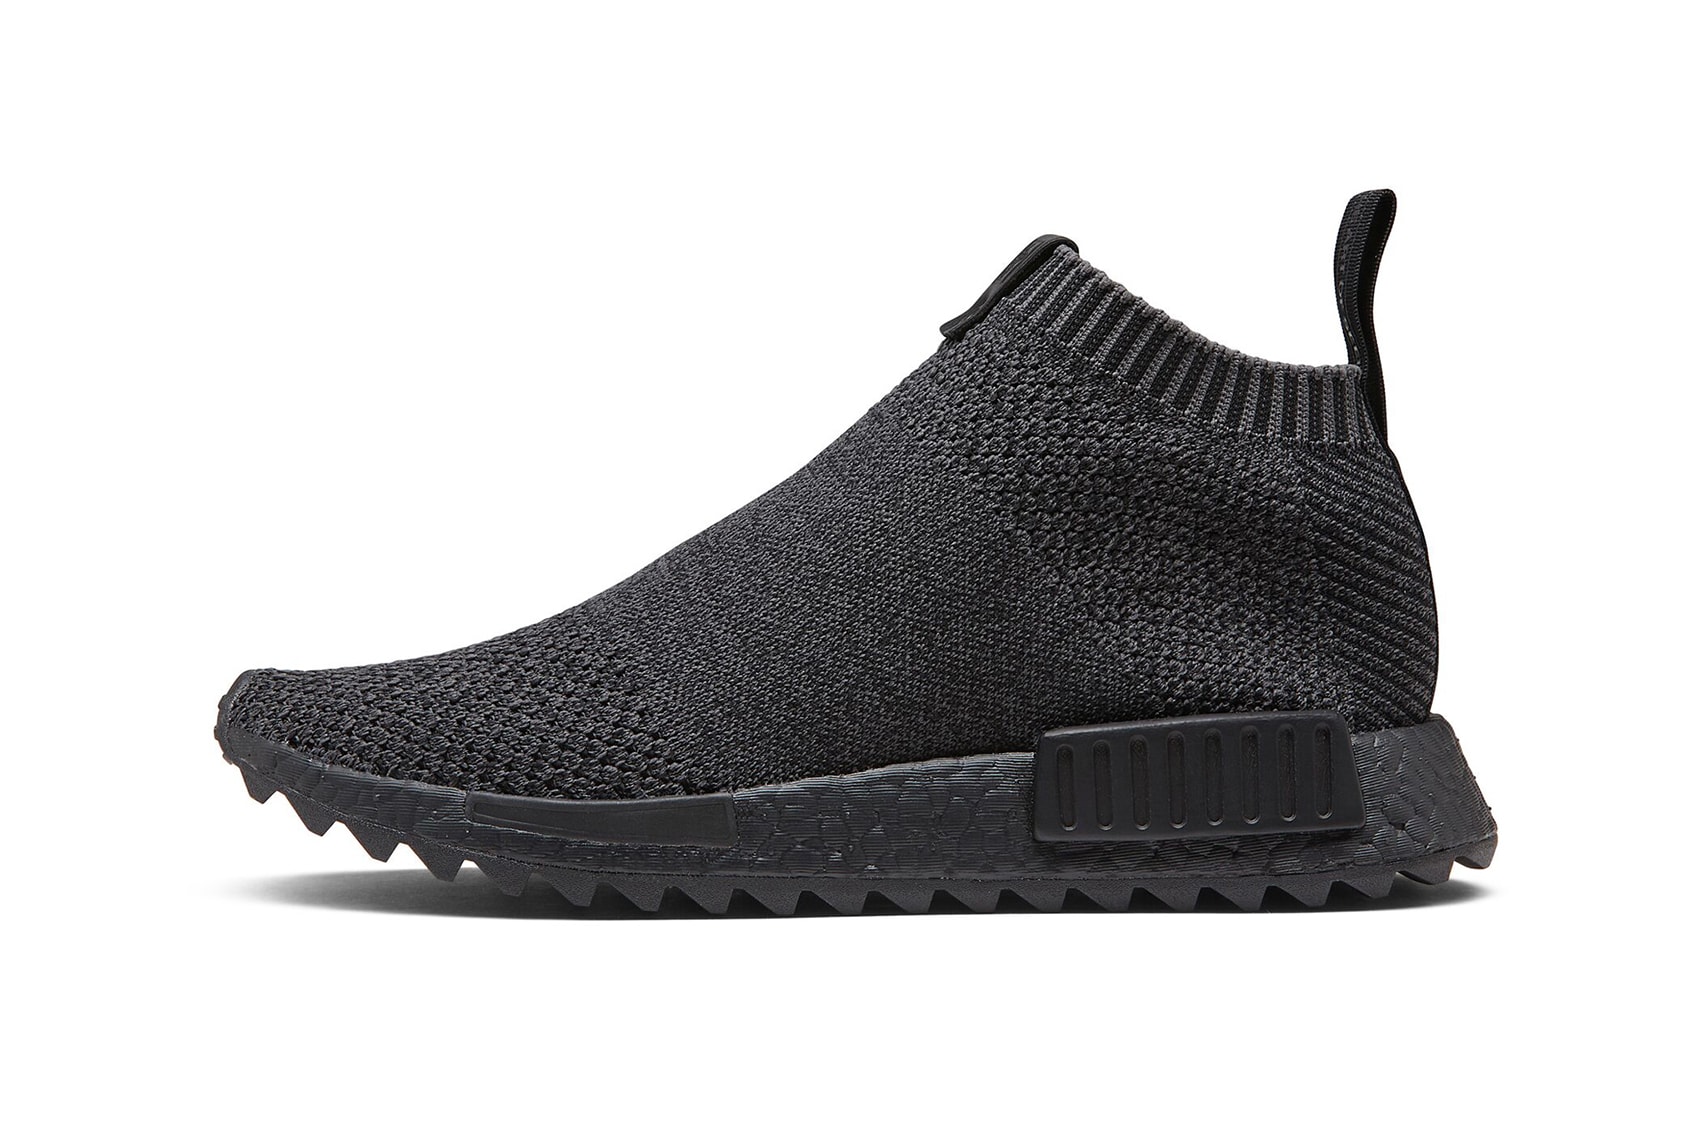 adidas Consortium x The Good Will Out NMD CS1 First Look Primeknit BOOST